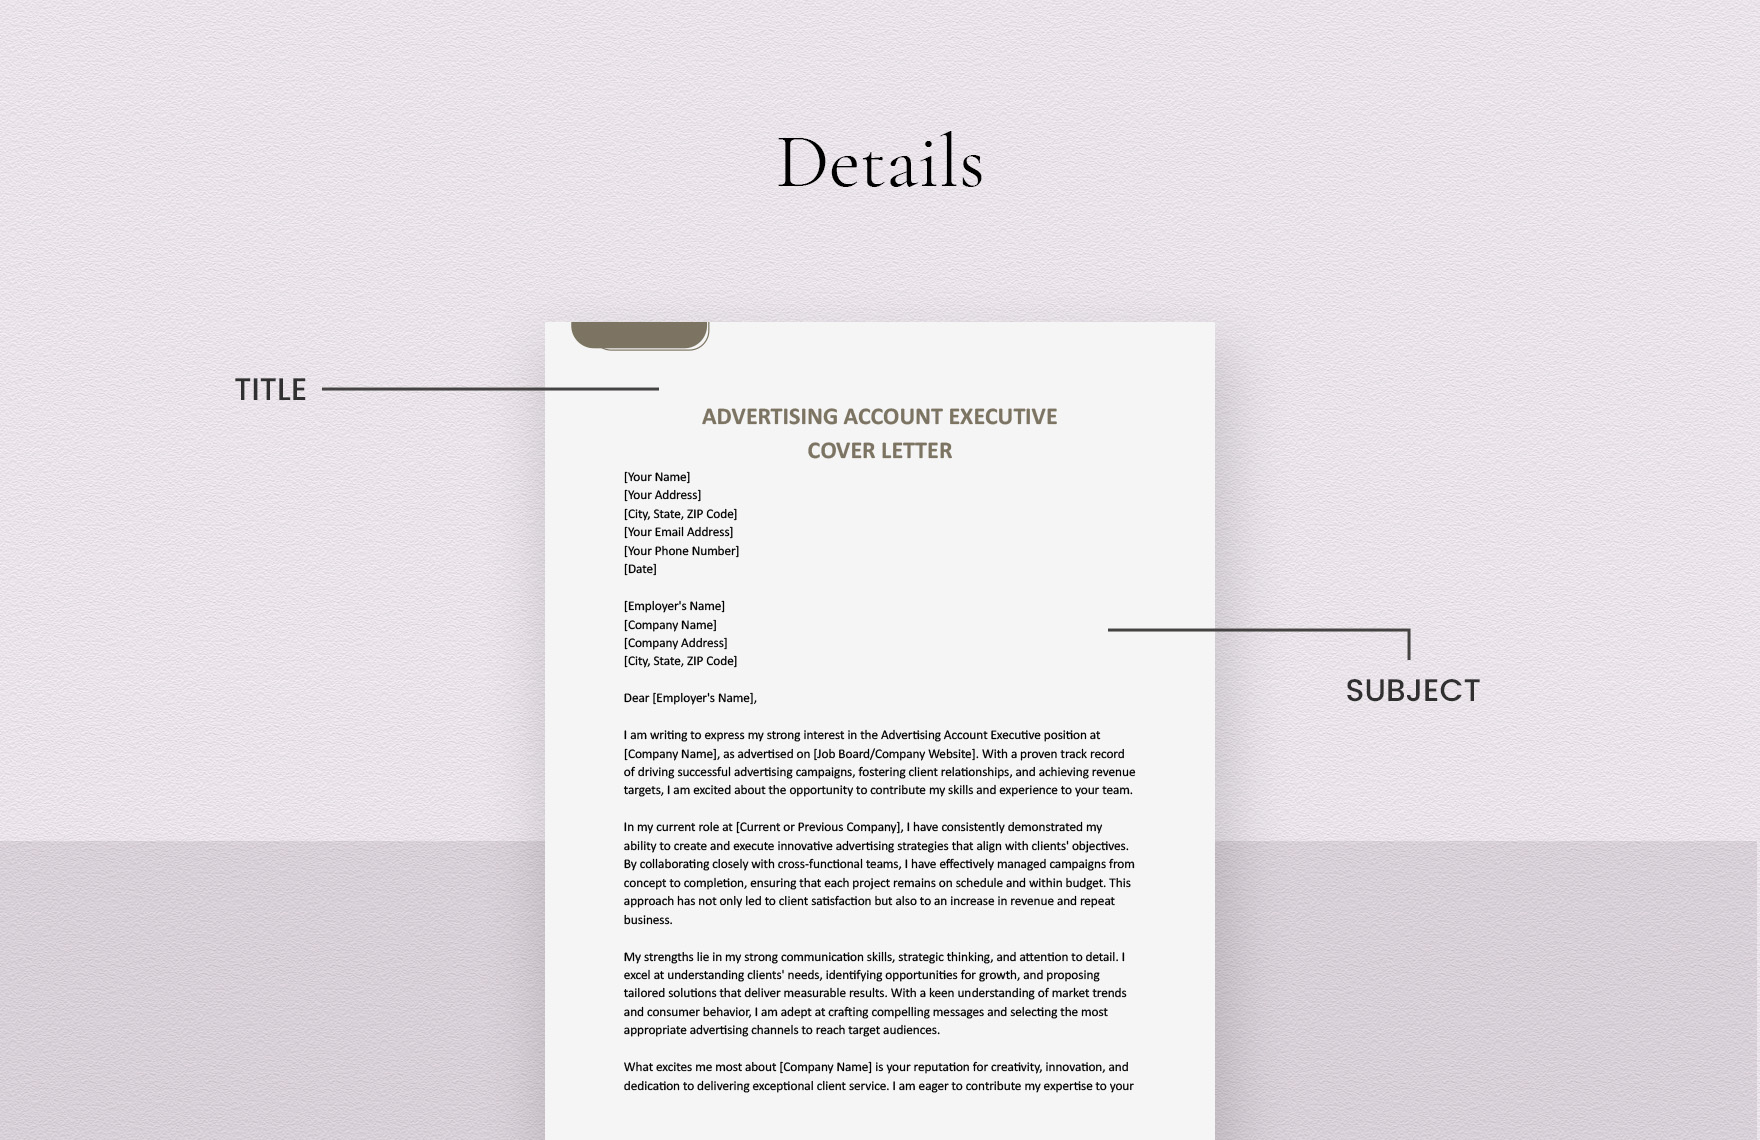 Advertising Account Executive Cover Letter